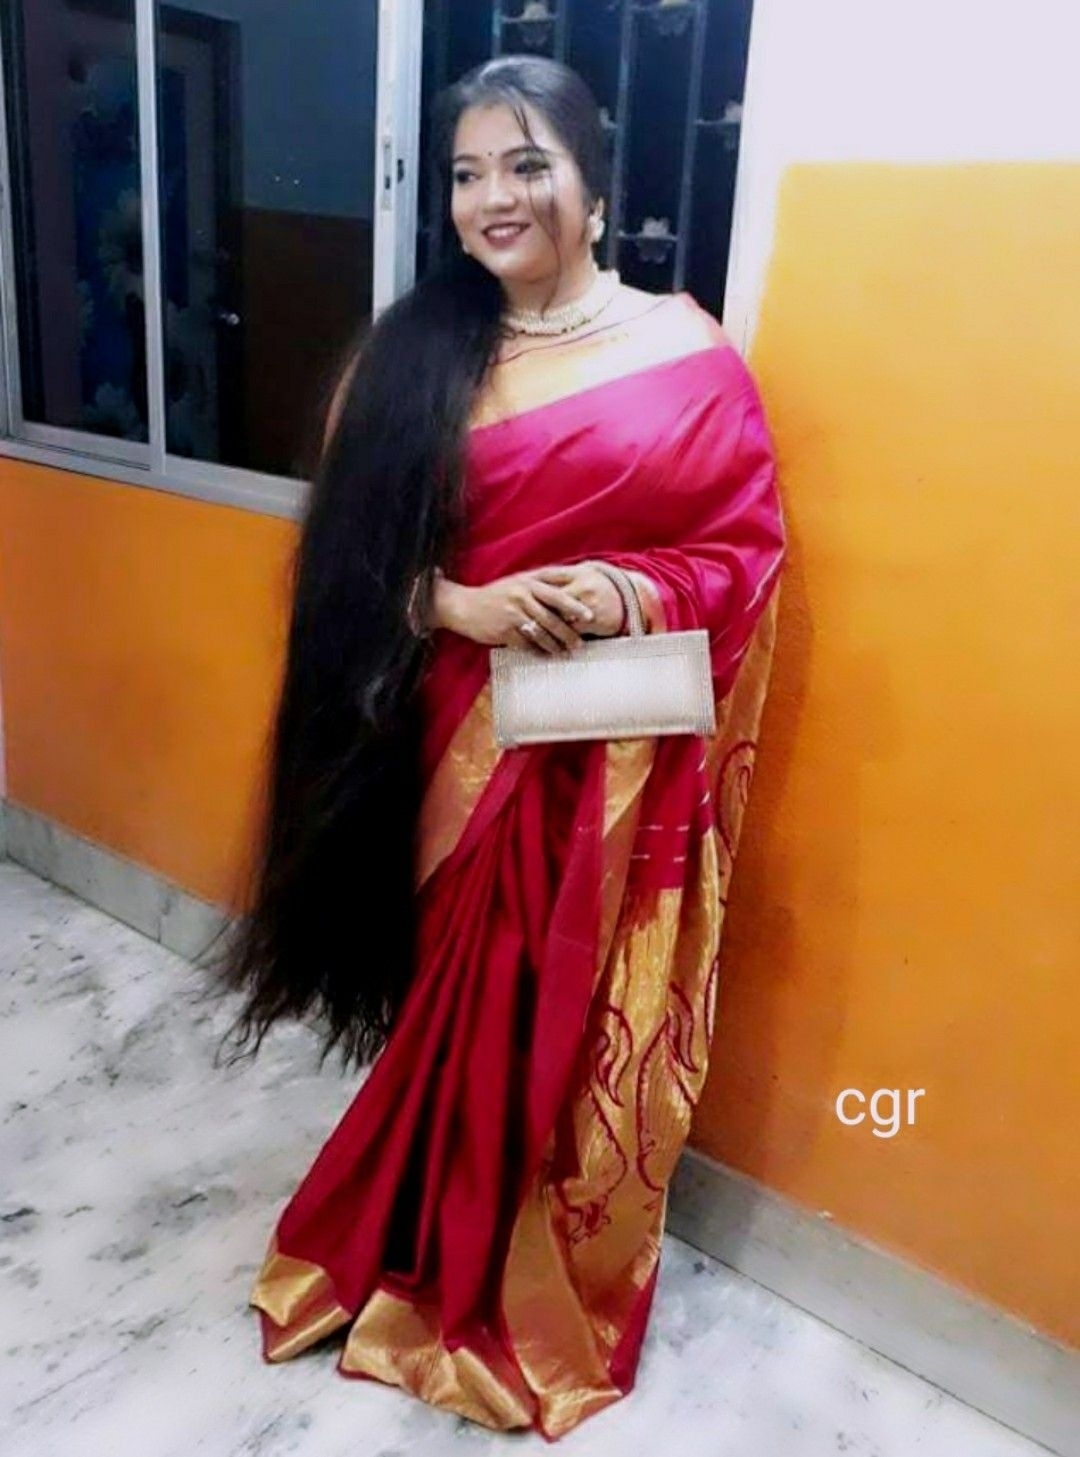 Pin By Govinda Rajulu Chitturi On Cgr Long Hair Show In 2019 inside Indian Hairstyles For Long Hair In Saree